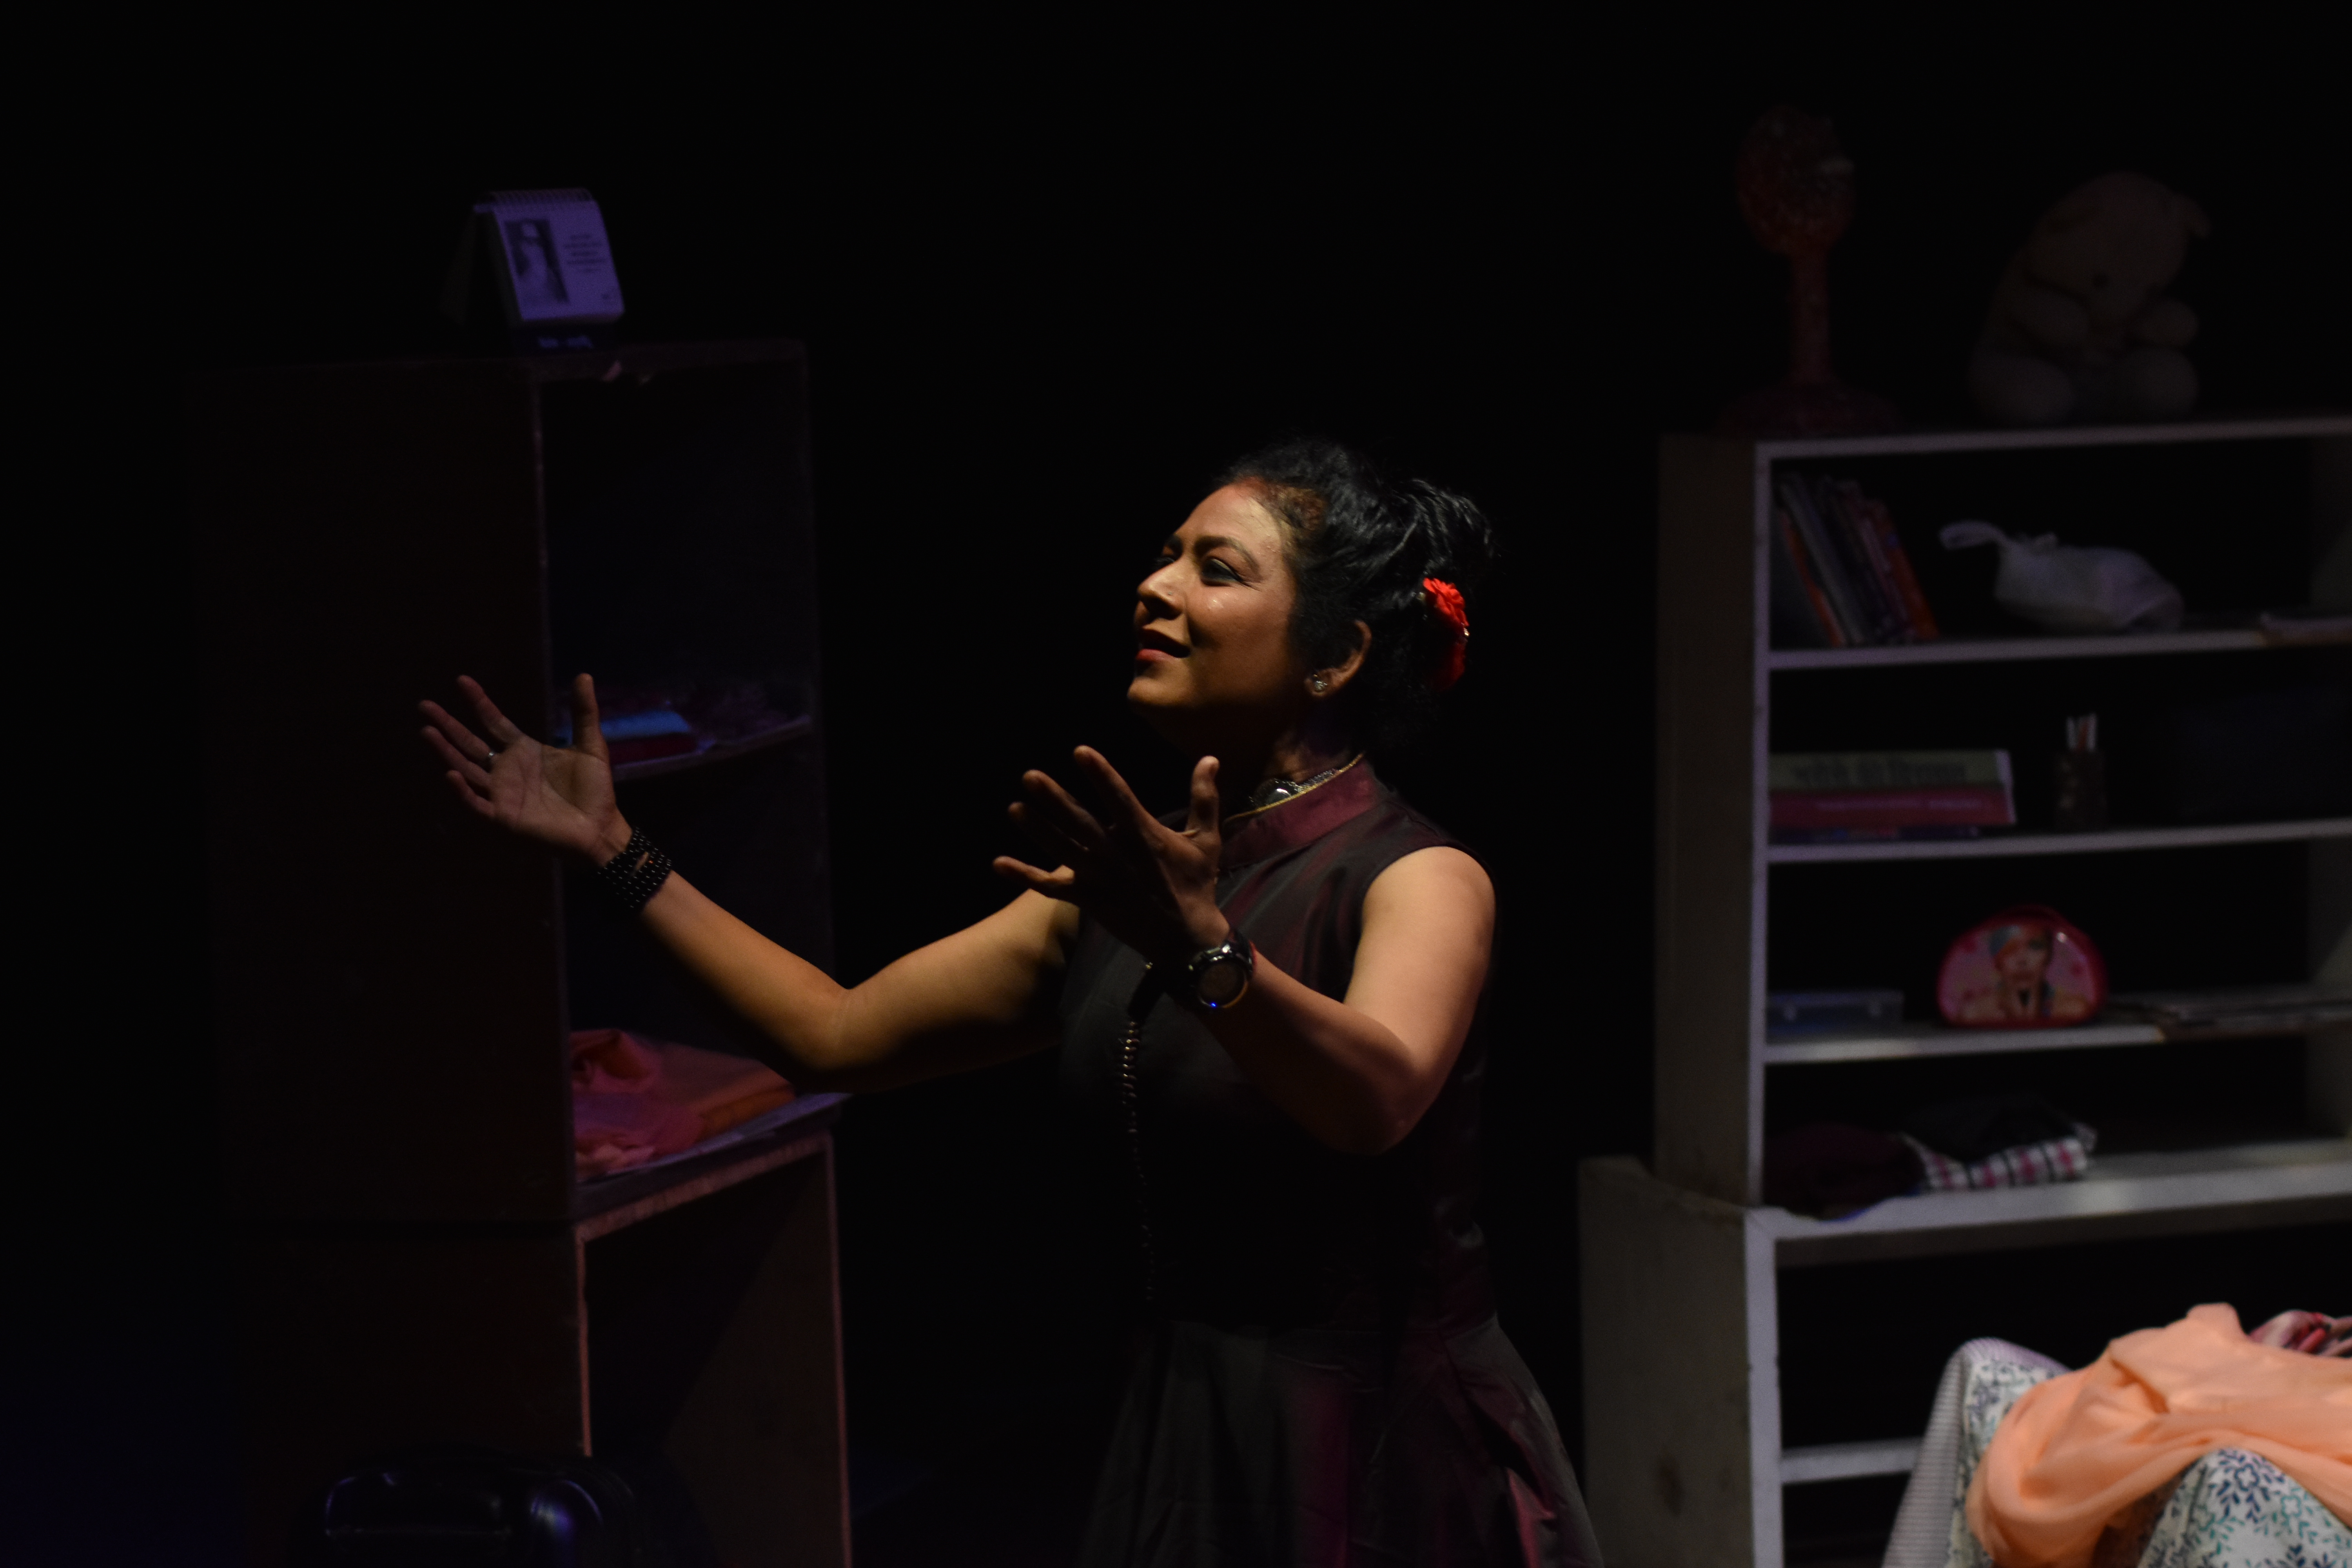 VIEWERS ENJOY A PLAY ON GENDER STEREOTYPES AND CONTEMPORARY KATHAK PERFORMANCE AT JKK